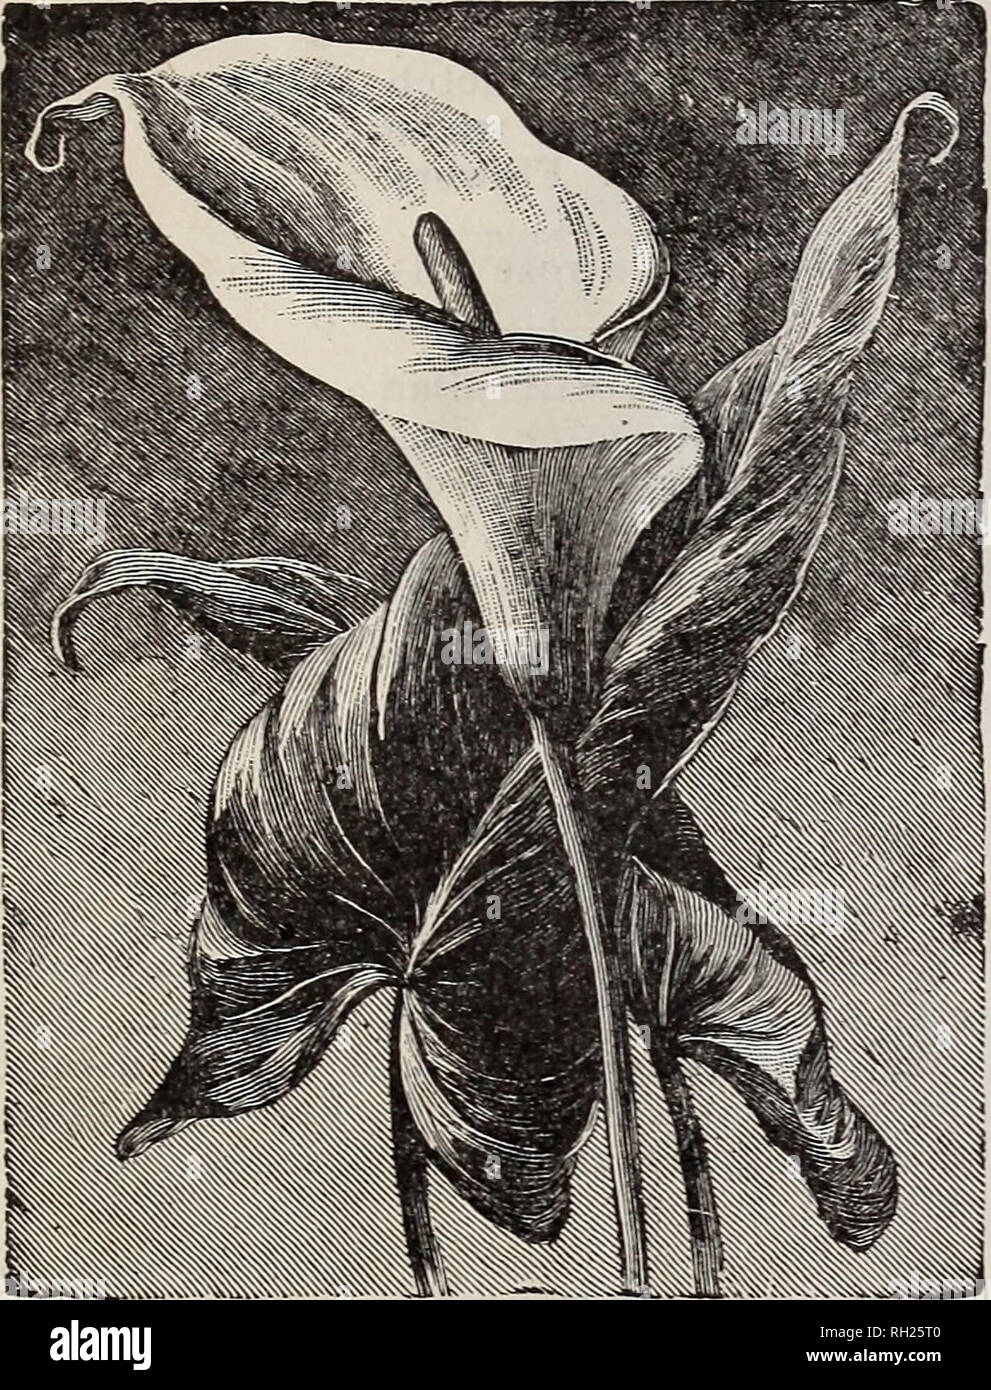 . Bulbs : for fall and winter planting. Horticulture Catalogs; Bulbs (Plants) Seeds Catalogs. 326-330 S. MAIN ST., LOS ANGELES. CALLA LILY Calla Lilies Postage 2c to 5c each extra Each Lily of the Nile, too well known in California to need further description. First size 10 Second size 10 Third size 5 Spotted, (Eicliardia alba maculata) has spotted leaves, very orna- mental ; flowers white with purplish brown throat 15 Arum Sanctum, (Black Calla) coal black, very striking. 25 Amorphophallus Rivieri, (Giant Black Calla) beautiful for groups. Ready about December 1st - 25 Pink Calla, (Rehmanni)  Stock Photo